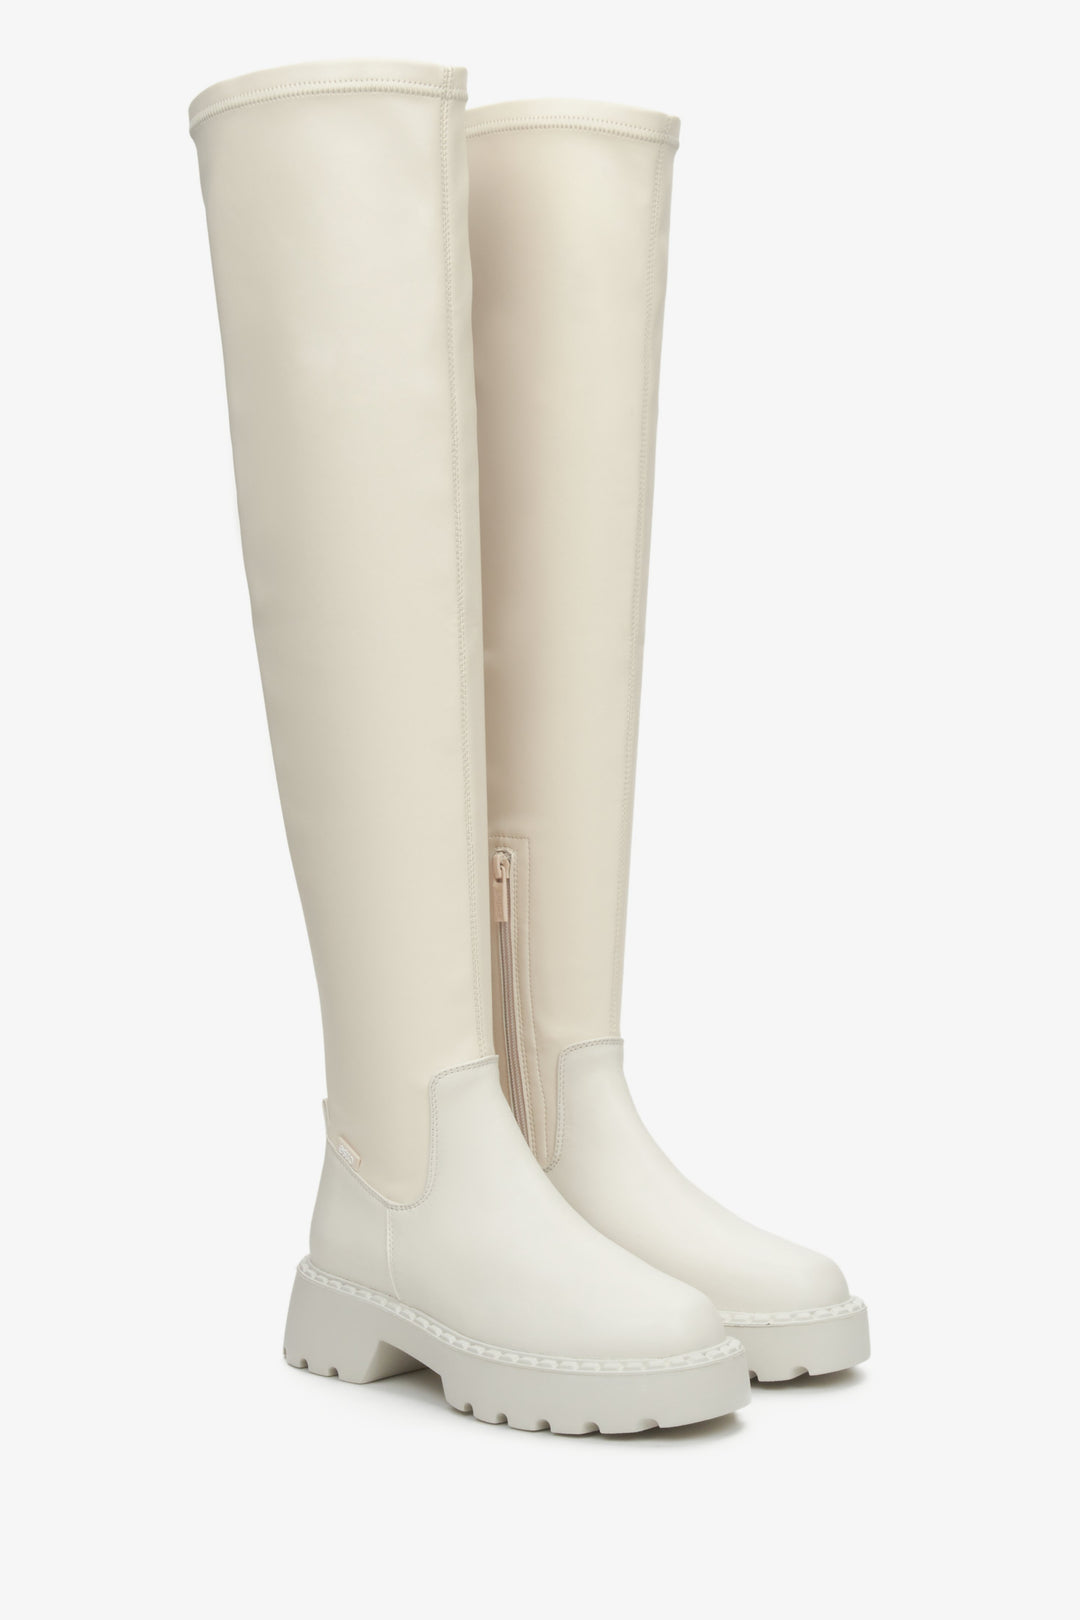 Light beige, high women's boots with an elastic upper by Estro.